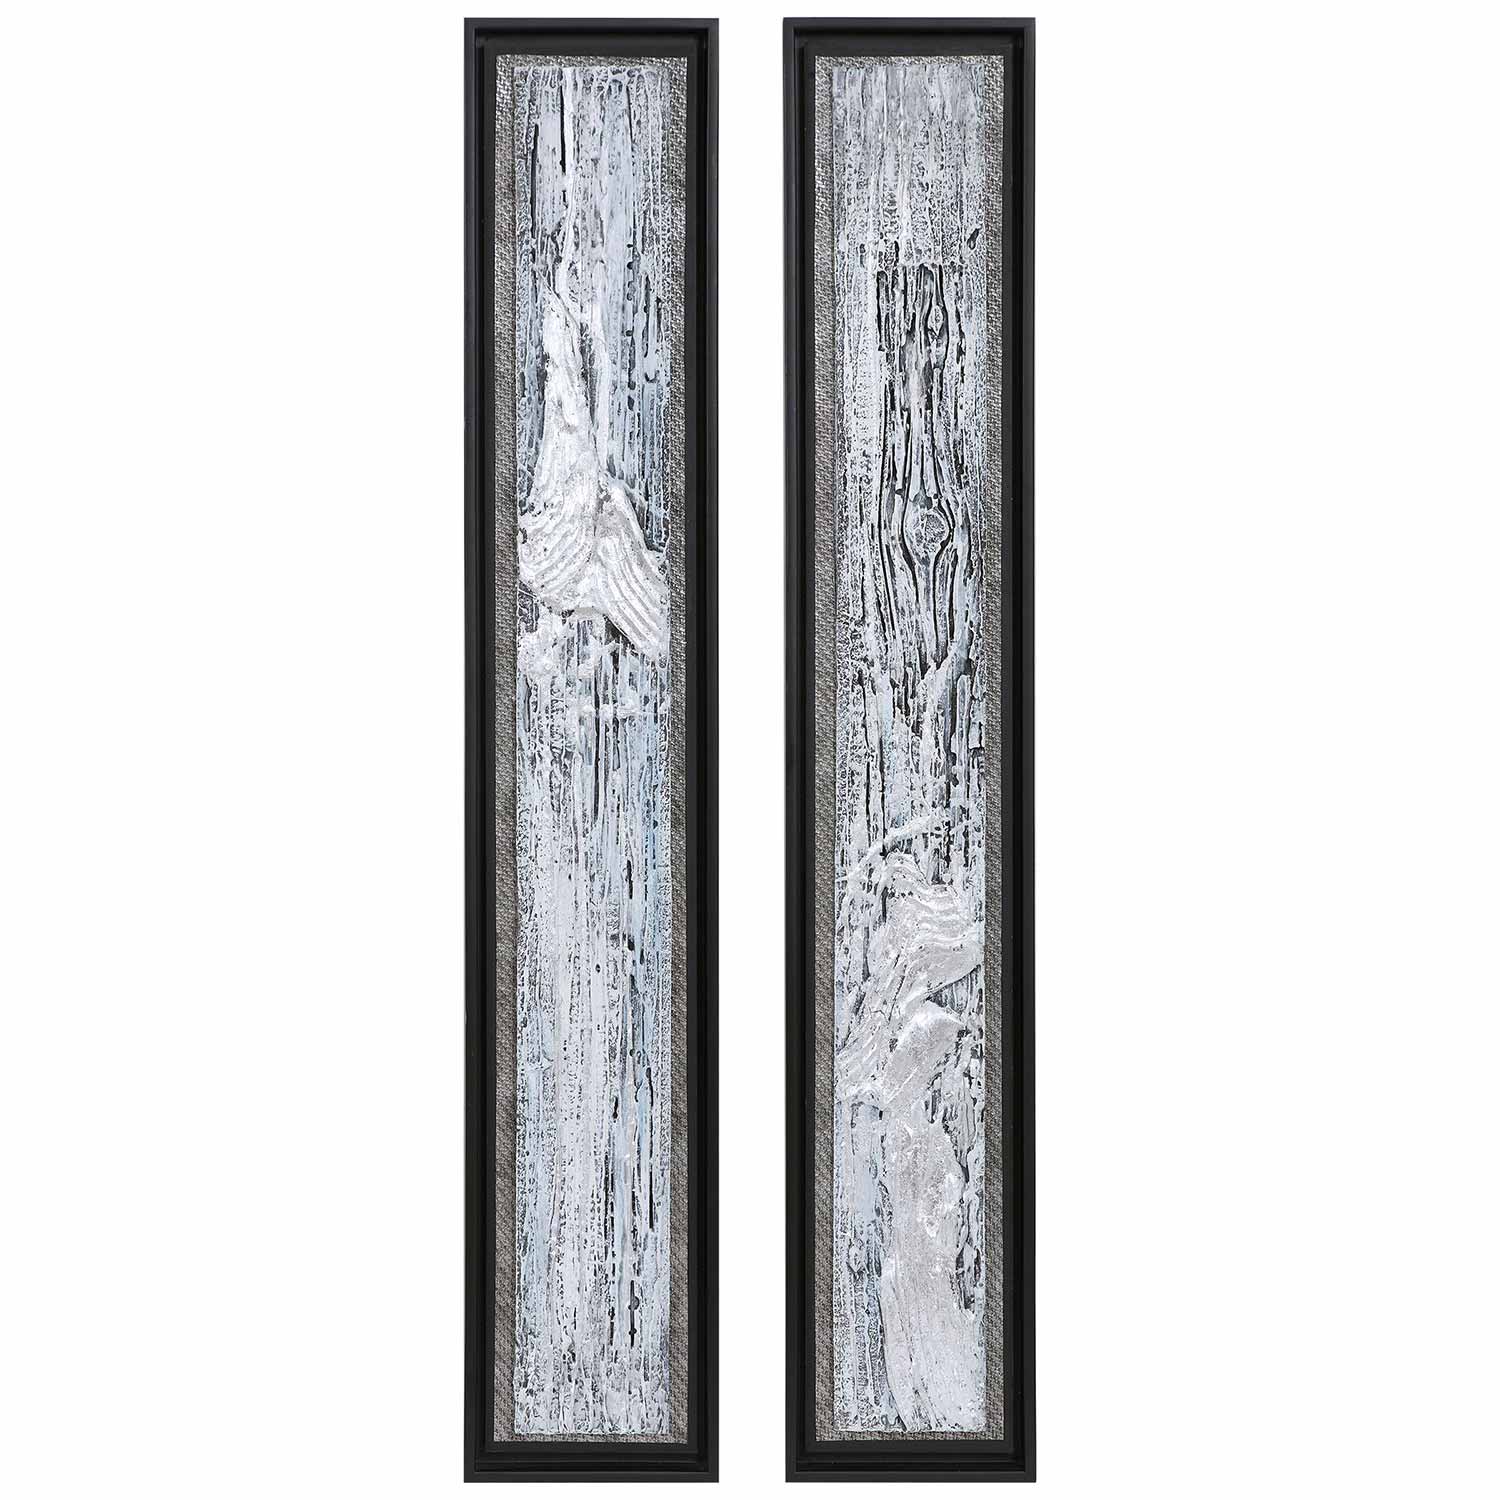 Uttermost Silver Lining Textured Abstract Art - Set of 2